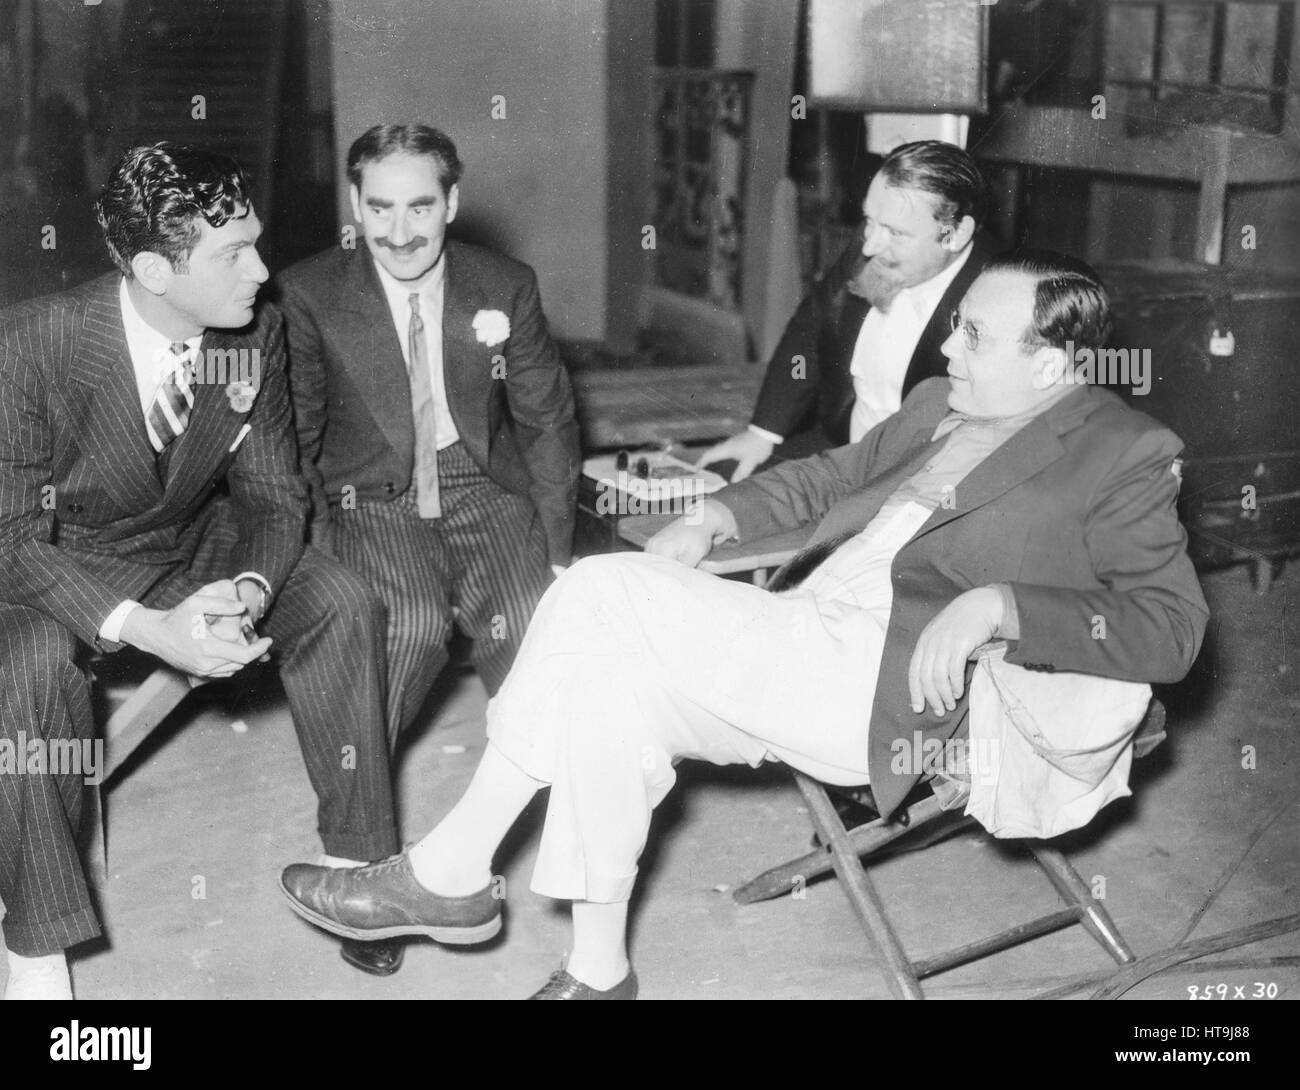 'Walter King, Groucho, Siegfried Rumann and Al Boasberg, gag man, enjoy a social chat while waiting for their next scene in 'A Night at the Opera,' the new Marx Brothers comedy, which Irving Thalberg is producing at the Metro-Goldwyn-Mayer studios. Sam Wood is directing the new picture.' Stock Photo